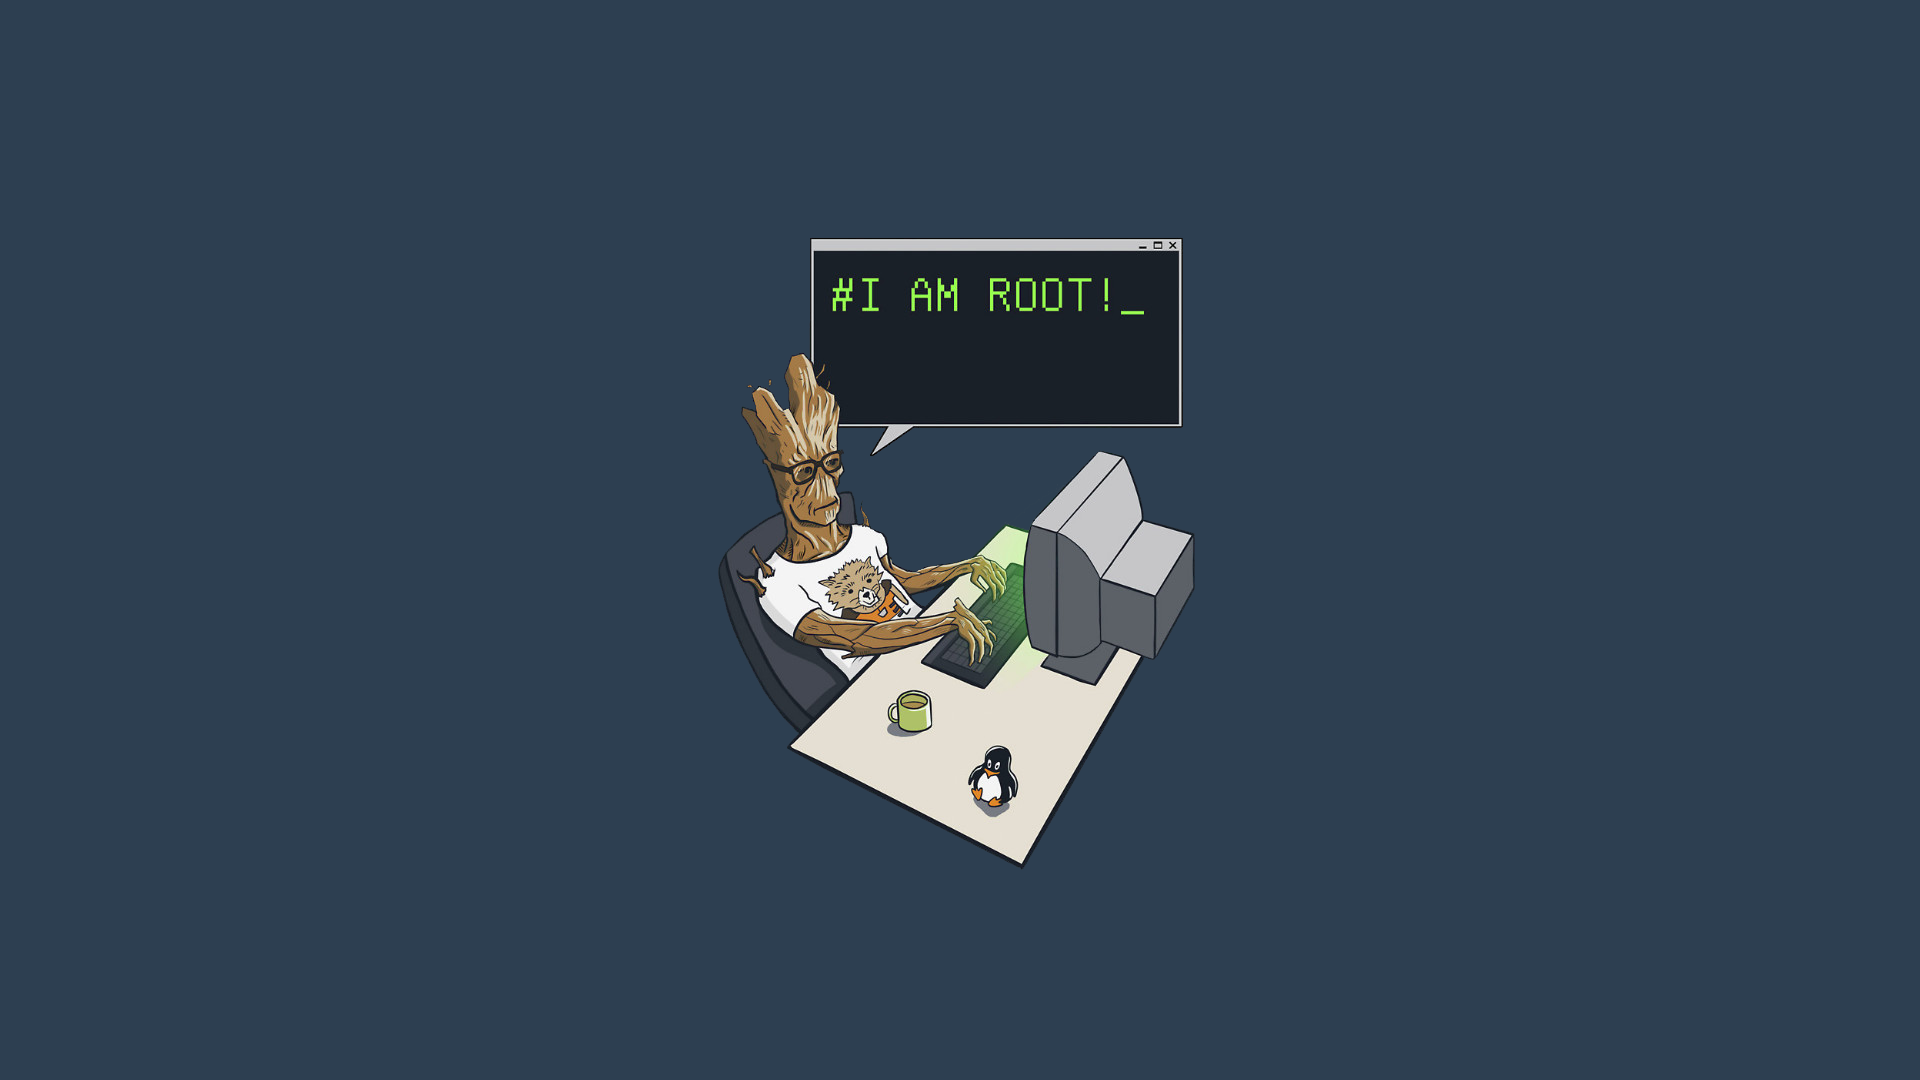 Linux Sudo Groot Root Arch Linux Humor 1920x1080